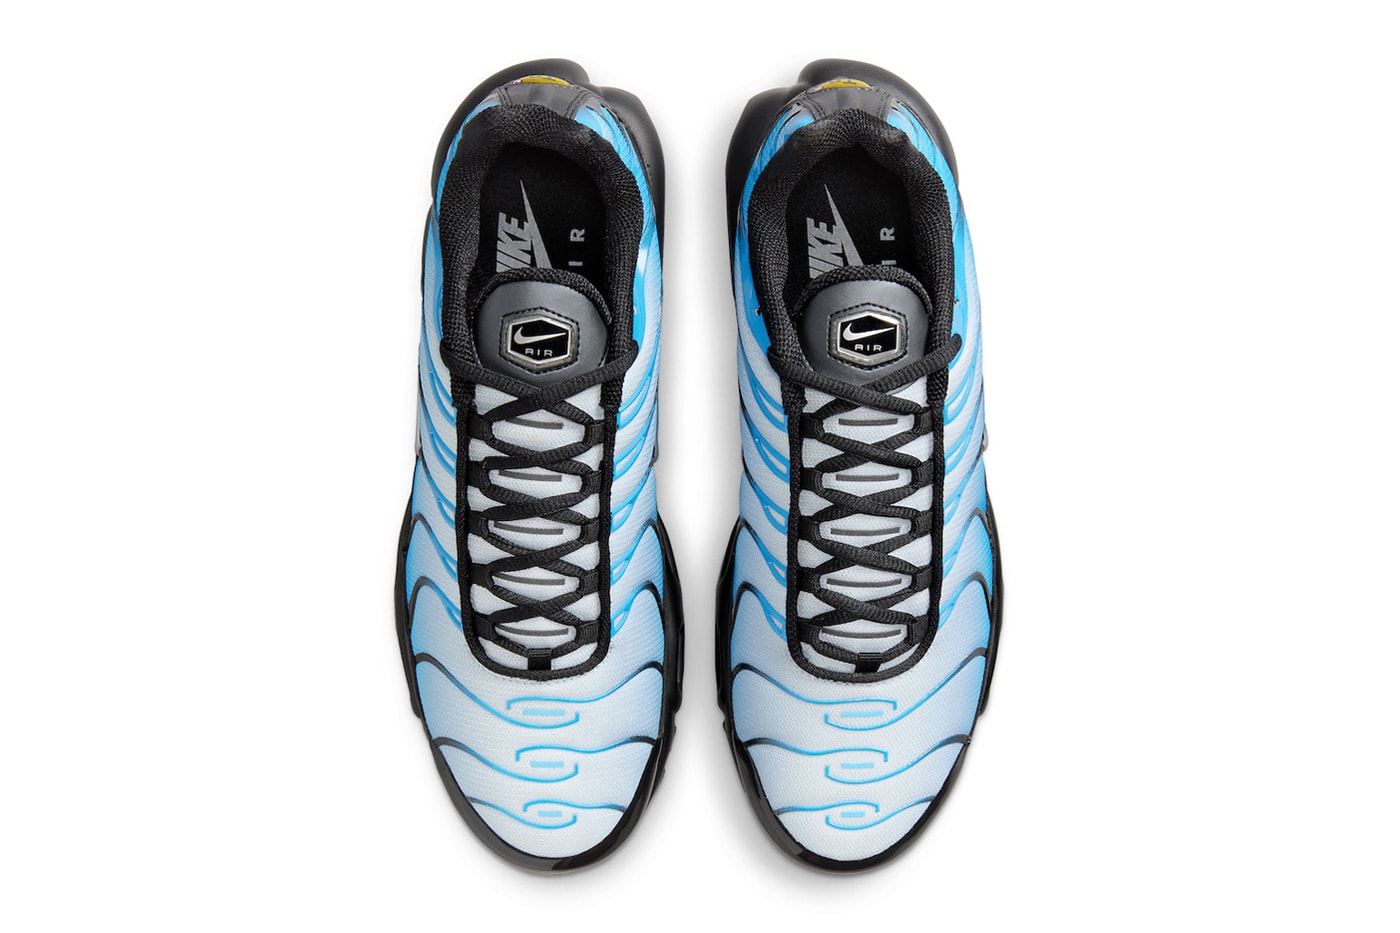 Nike Air Max Plus Arrives in Icy "Blue Gradient" FQ0204-010 summer 2023 technical running shoes sneakers swoosh